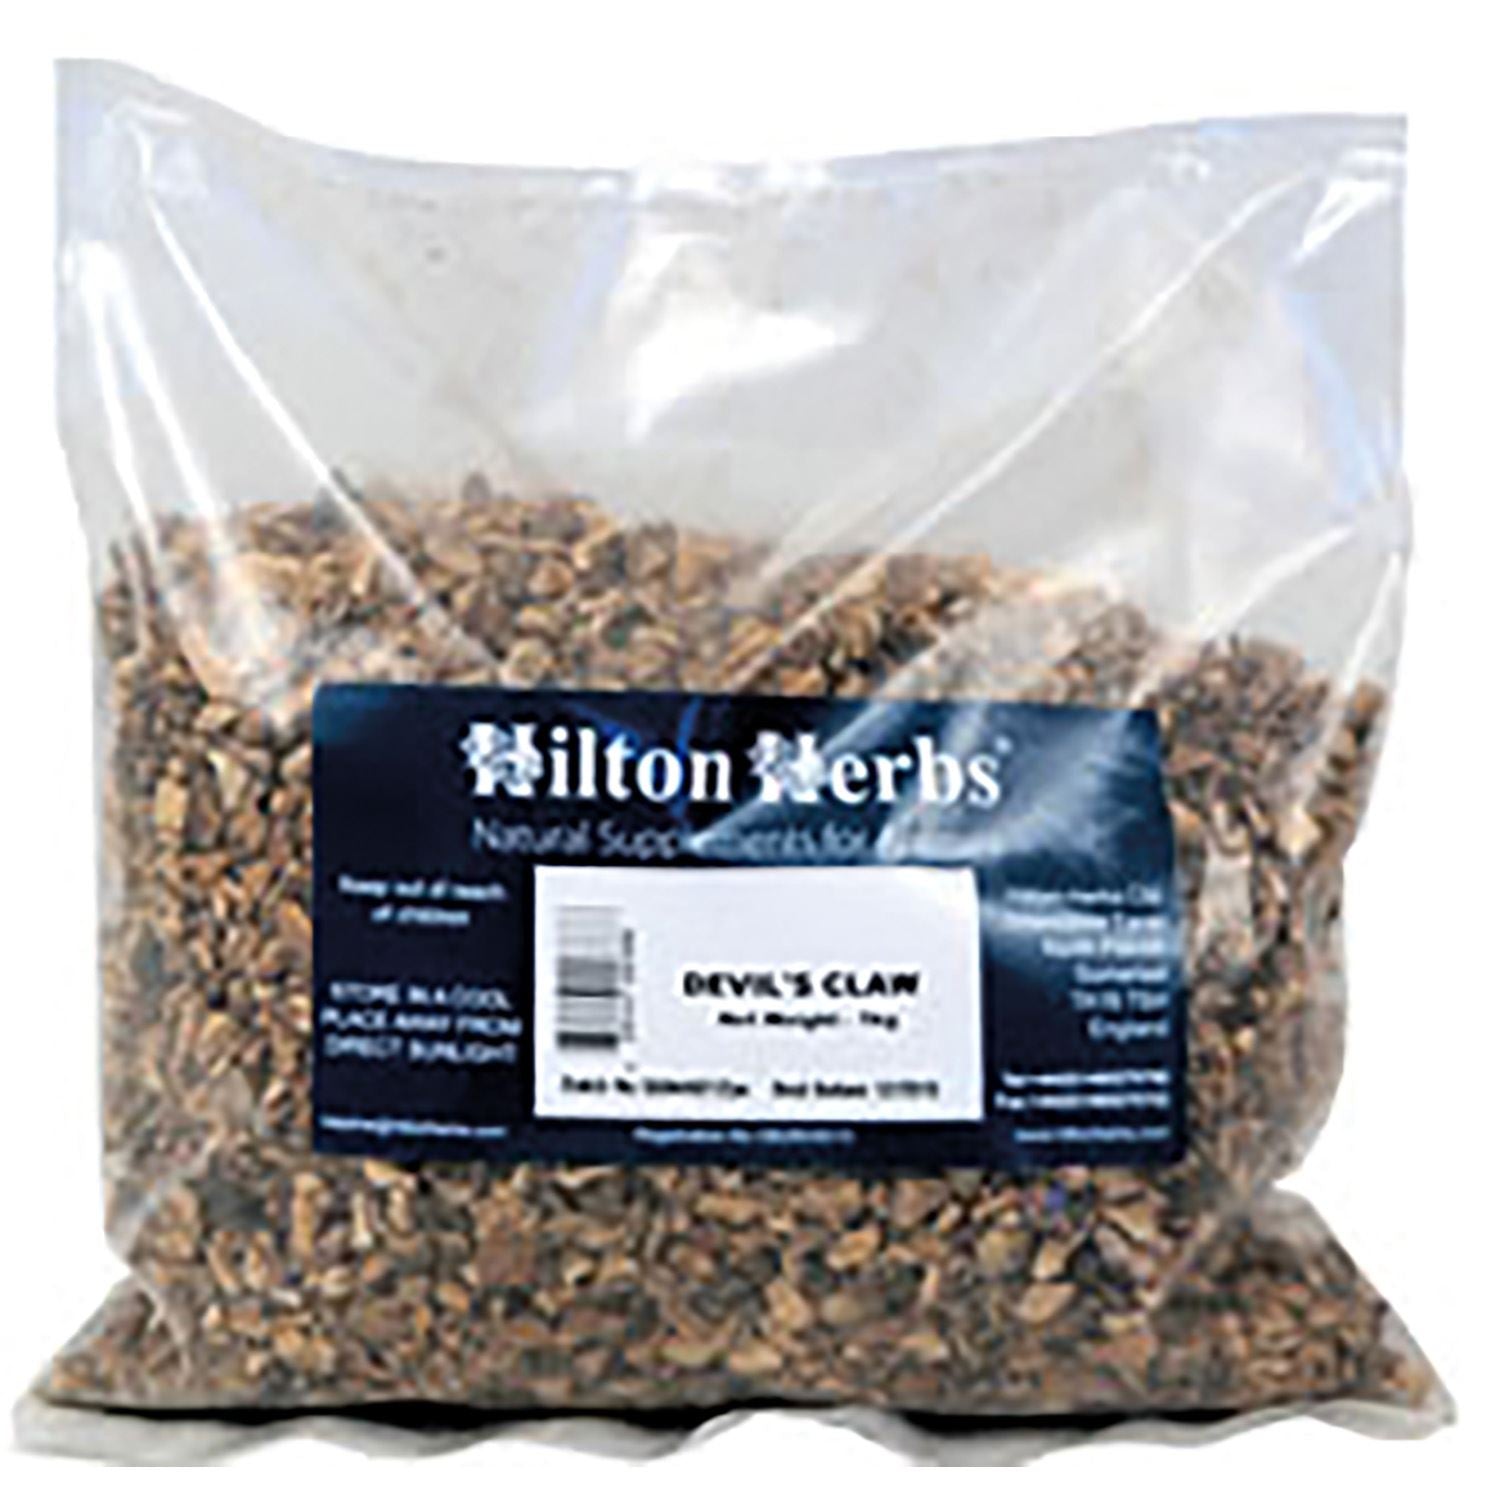 Hilton Herbs Devils Claw - Just Horse Riders